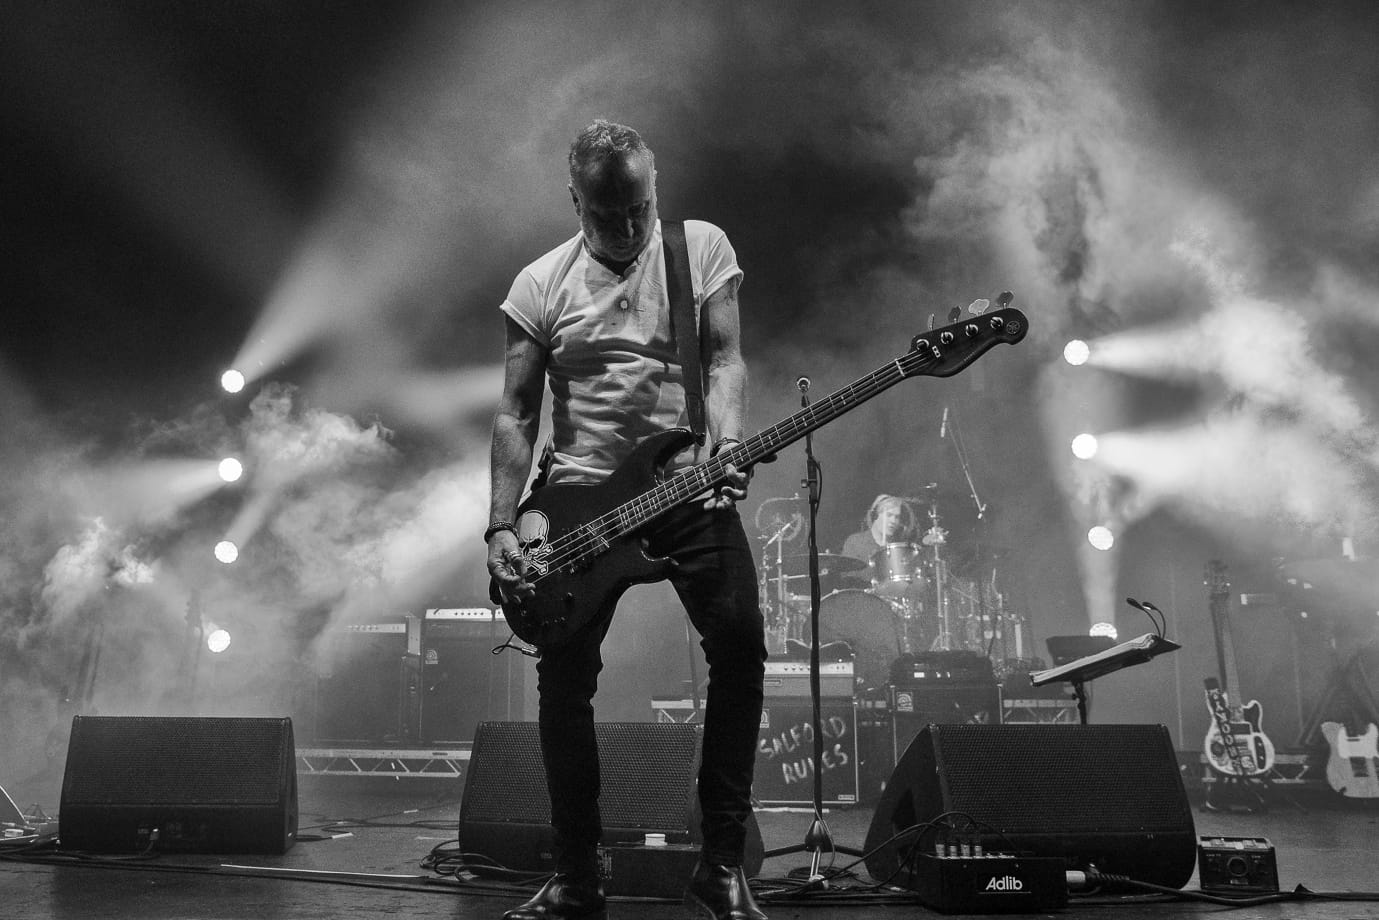 PETER HOOK & THE LIGHT Playing JOY DIVISION + NEW ORDER ‘Substance’ Albums In Full On Australian Tour